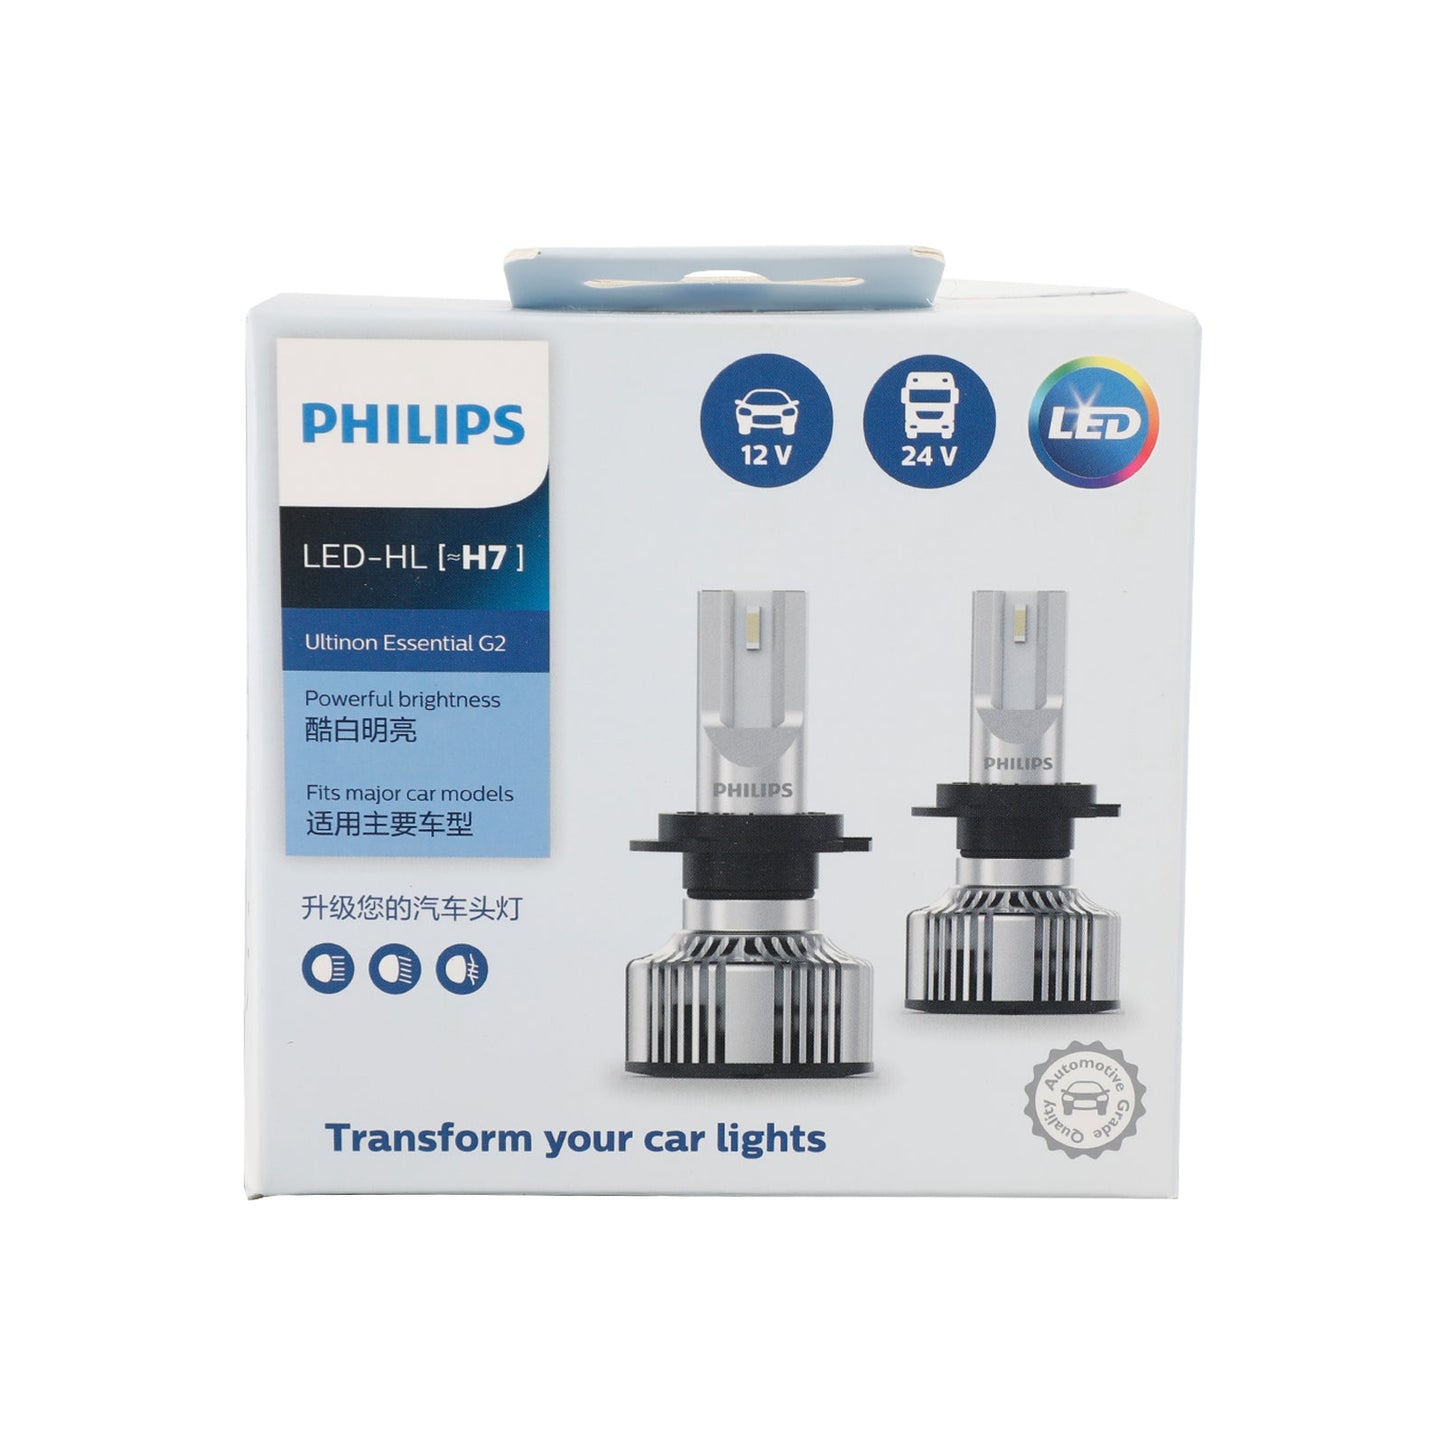 Pour Philips 11972UE2X2 Ultinon Essential G2 phare LED H7 20W PX26D 6500K